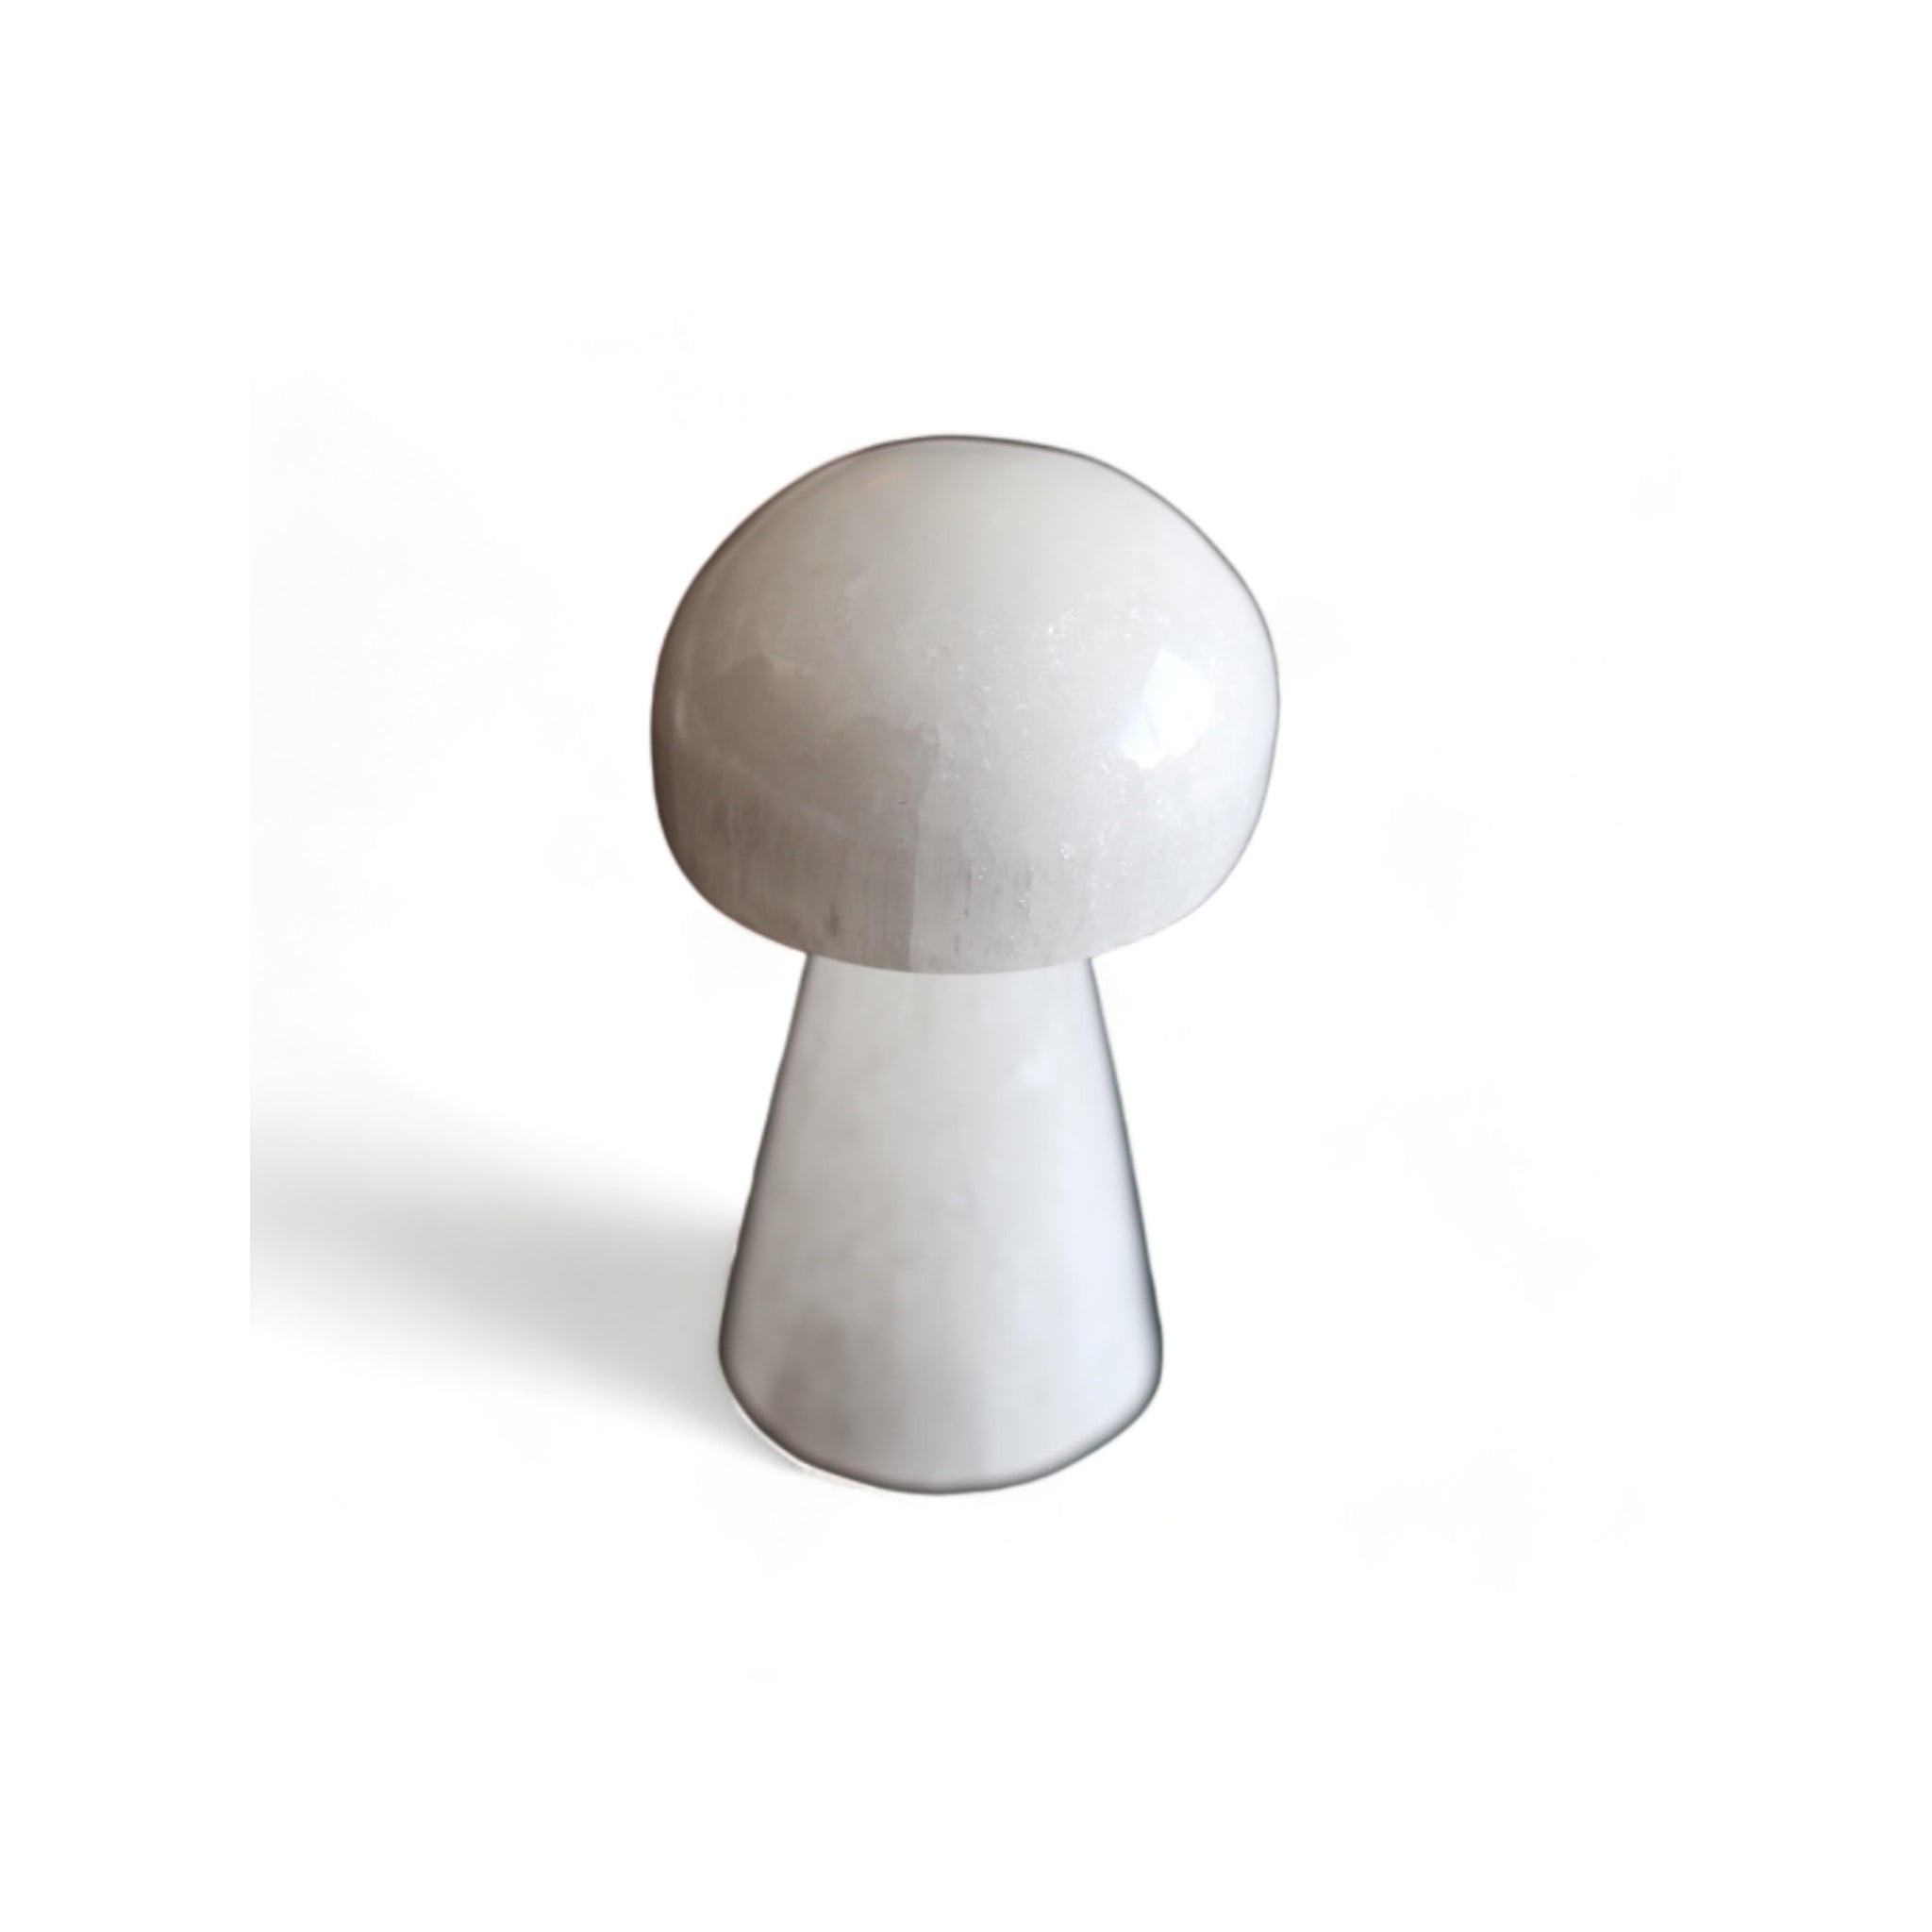 Selenite Mushroom - Home Decor with Natural Tranquility